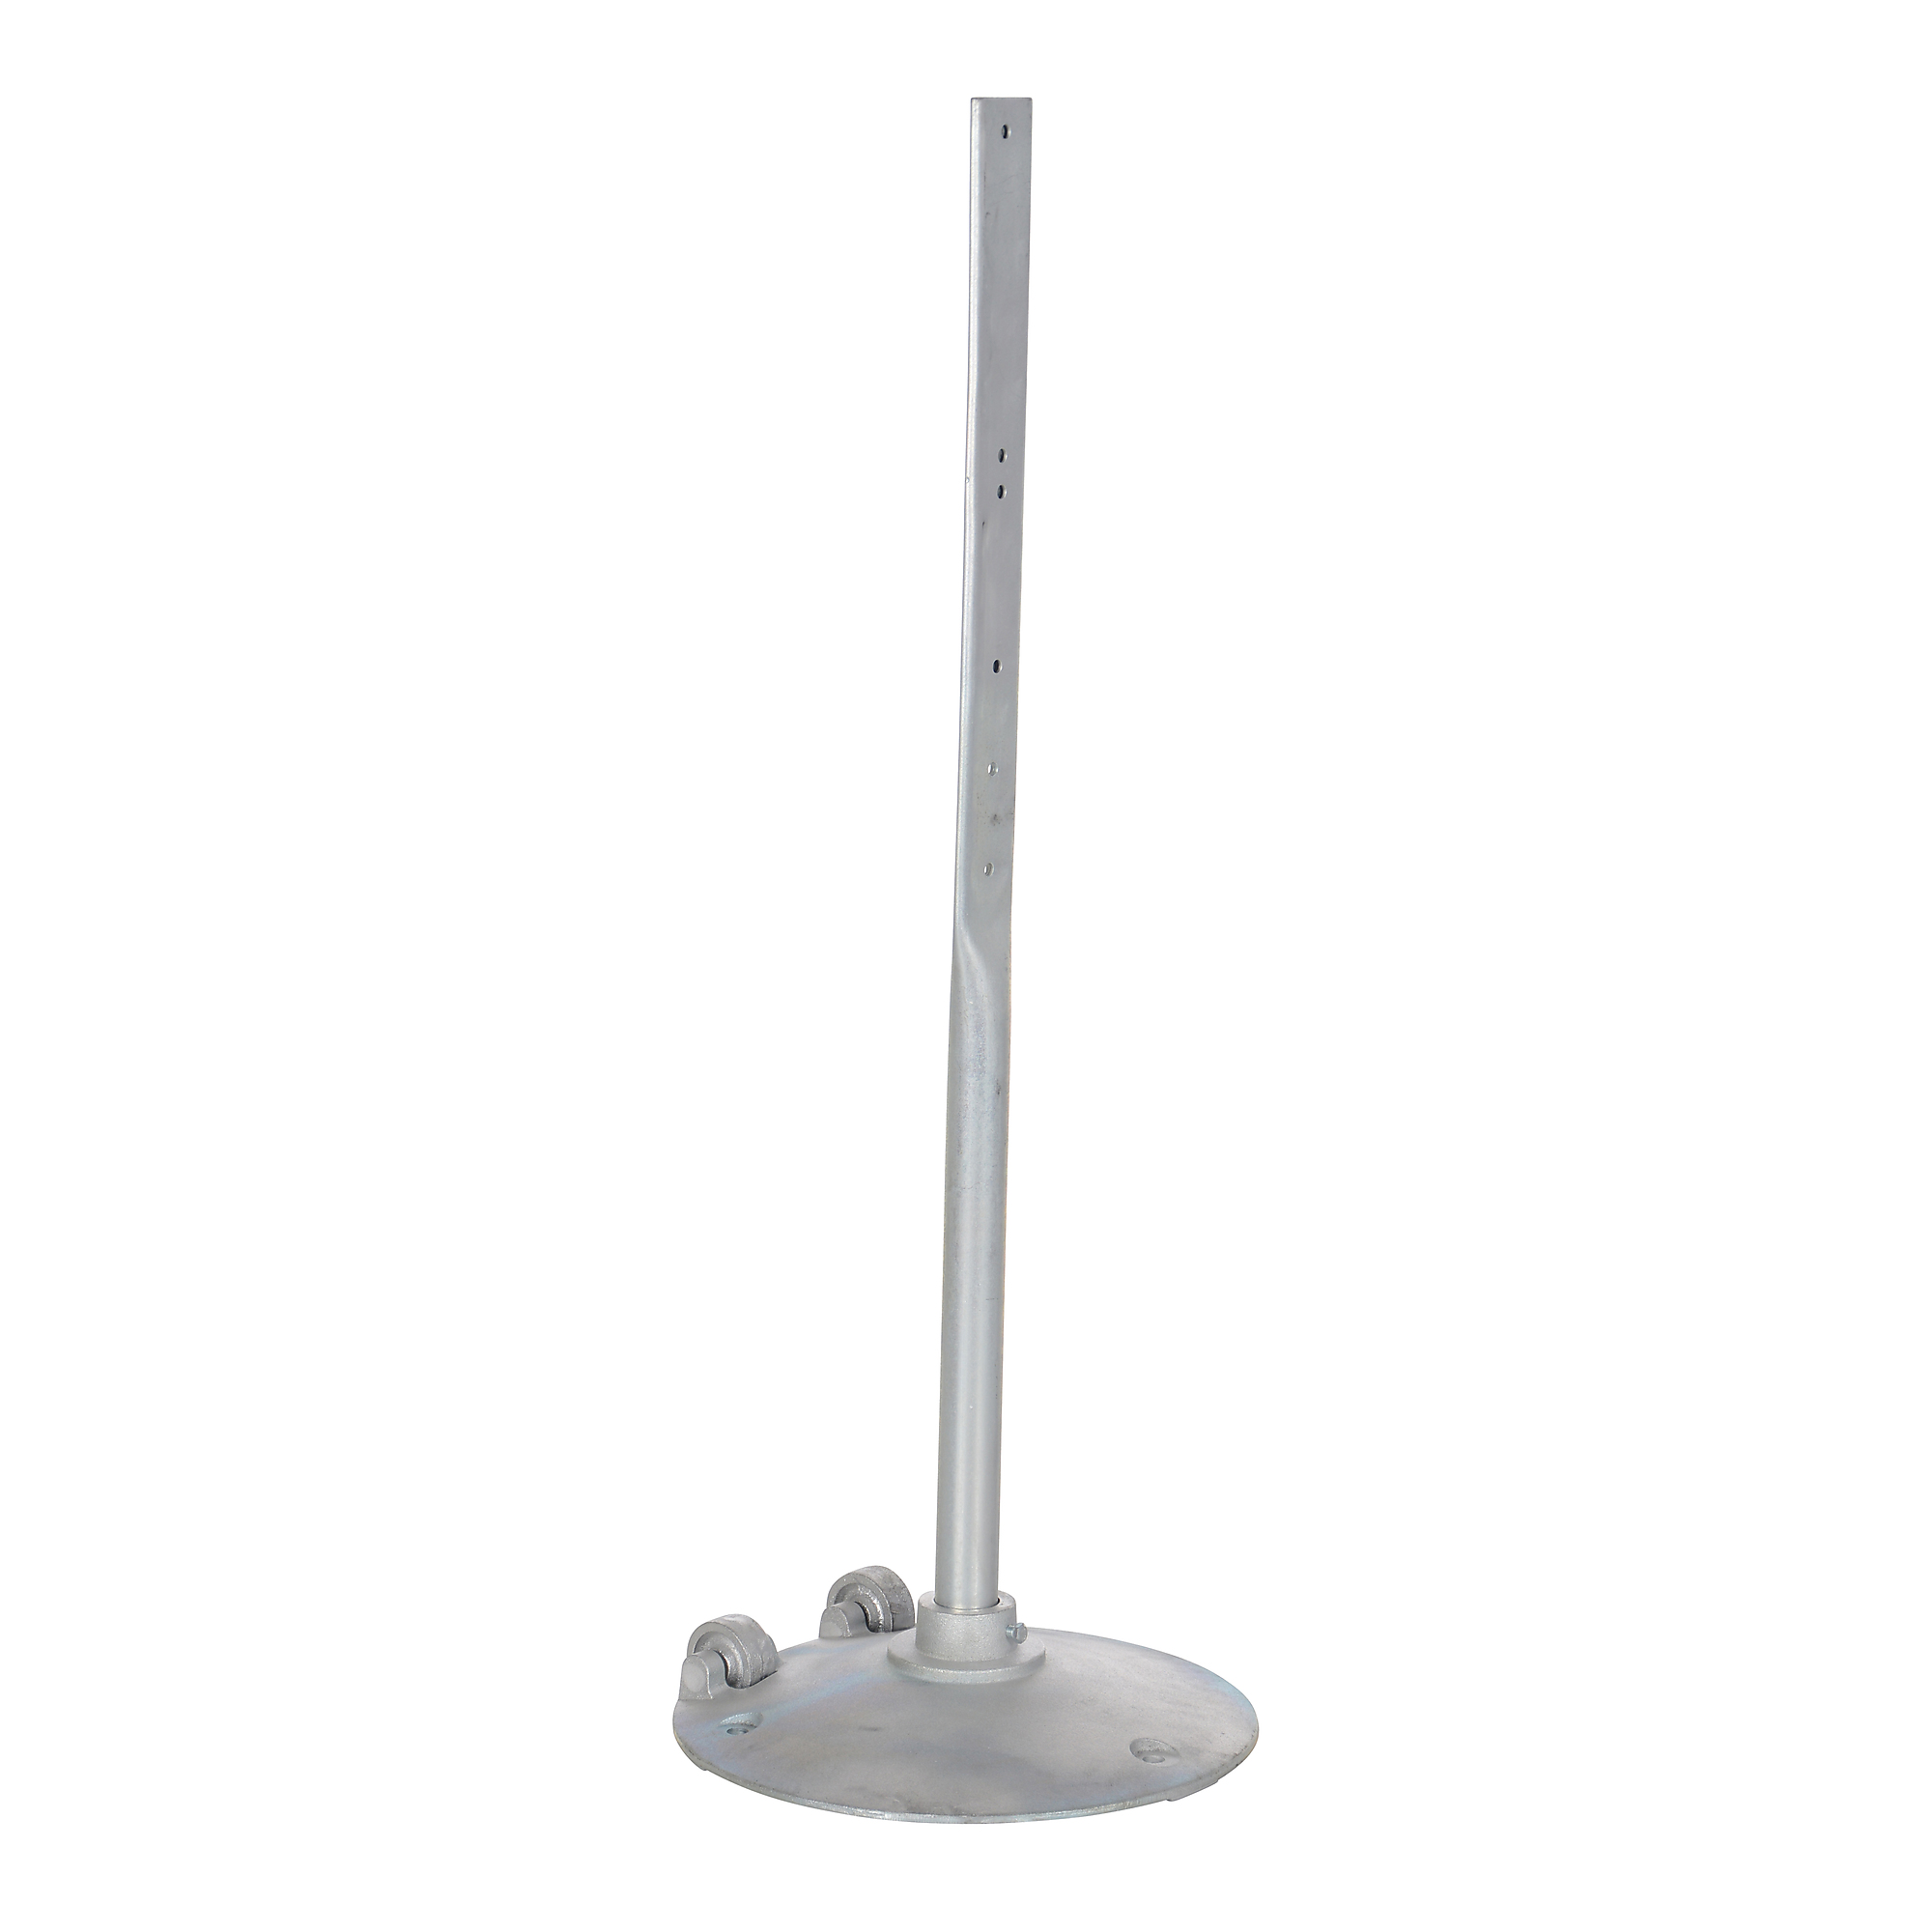 Vestil, Steel Sign Stand with Wheels, Height 48 in, Length 16.75 in, Model S-STAND-W